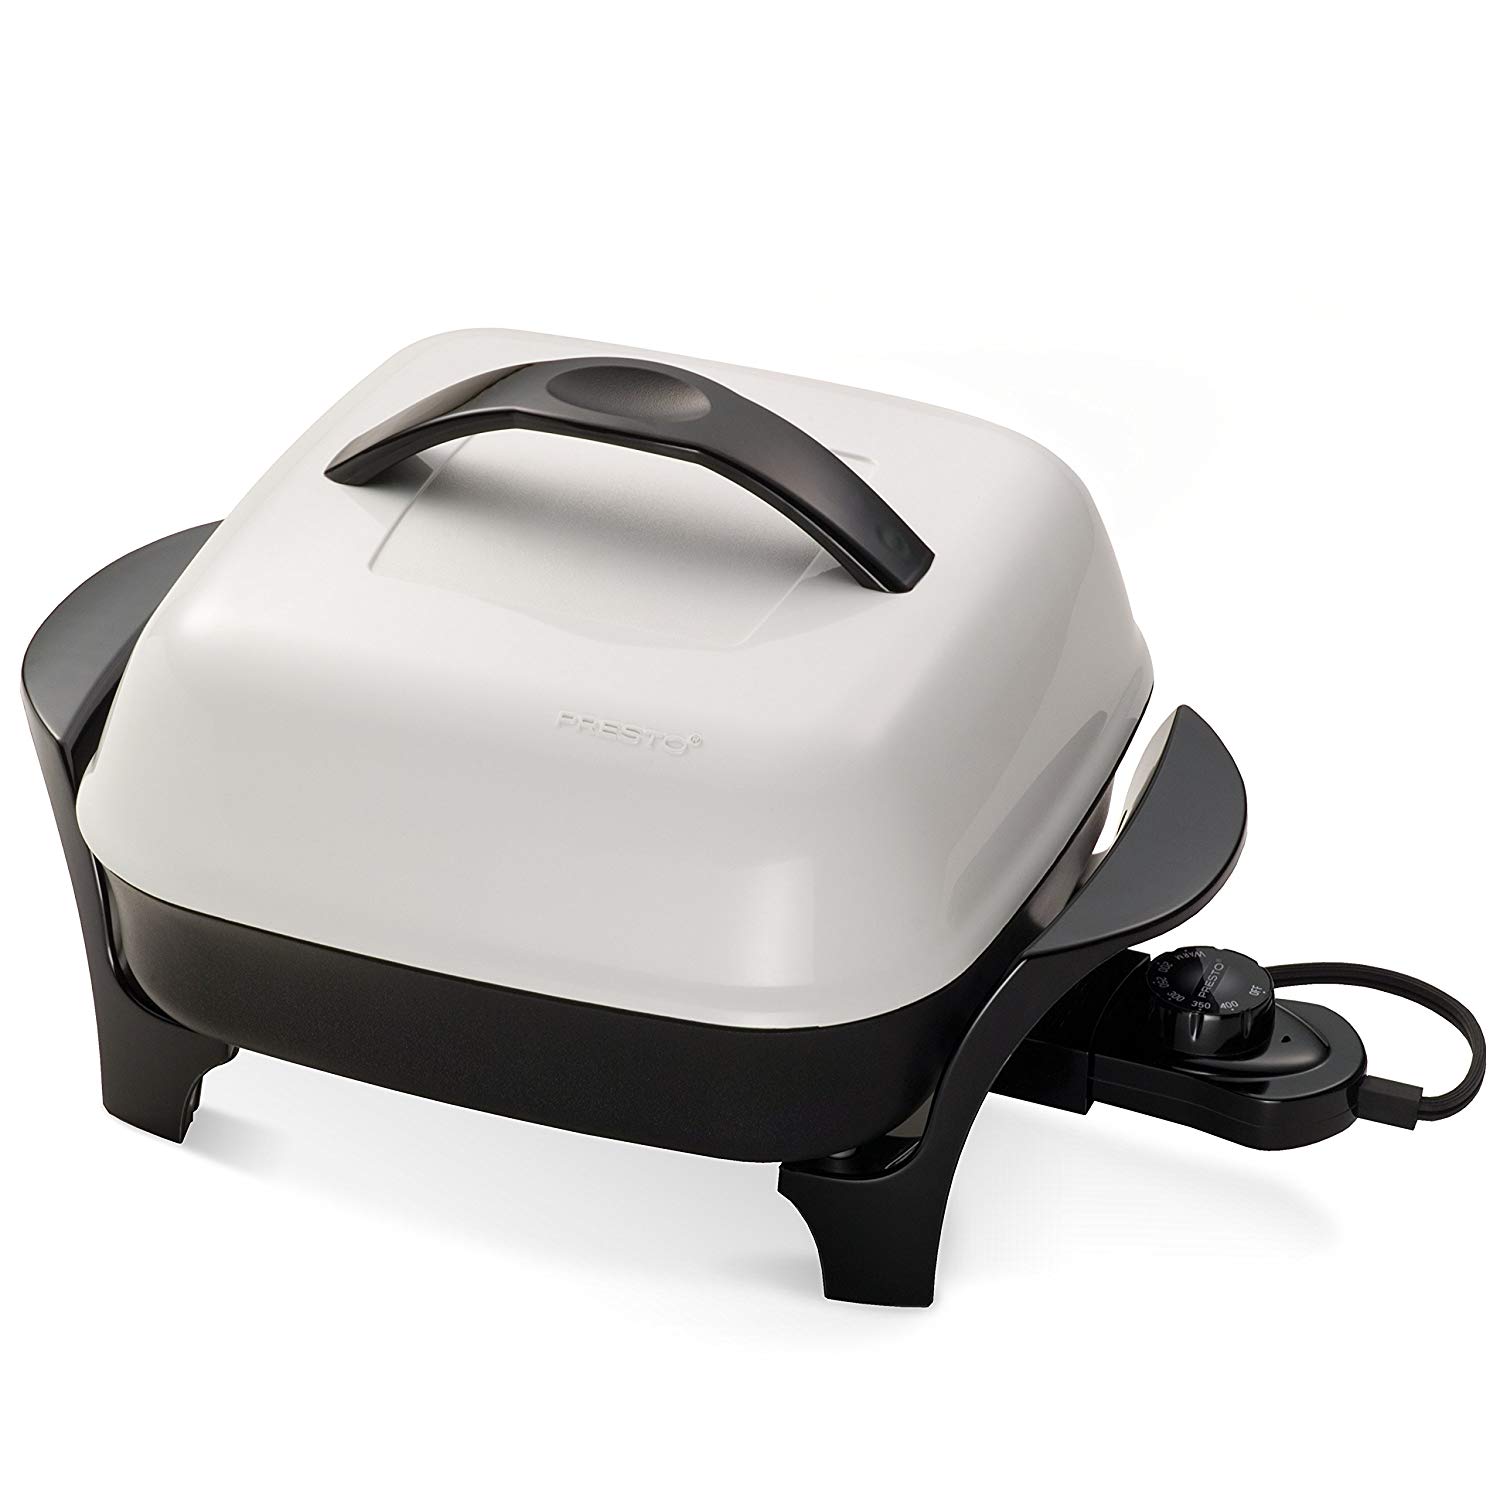 You are currently viewing Presto 06620 11-Inch Electric Skillet